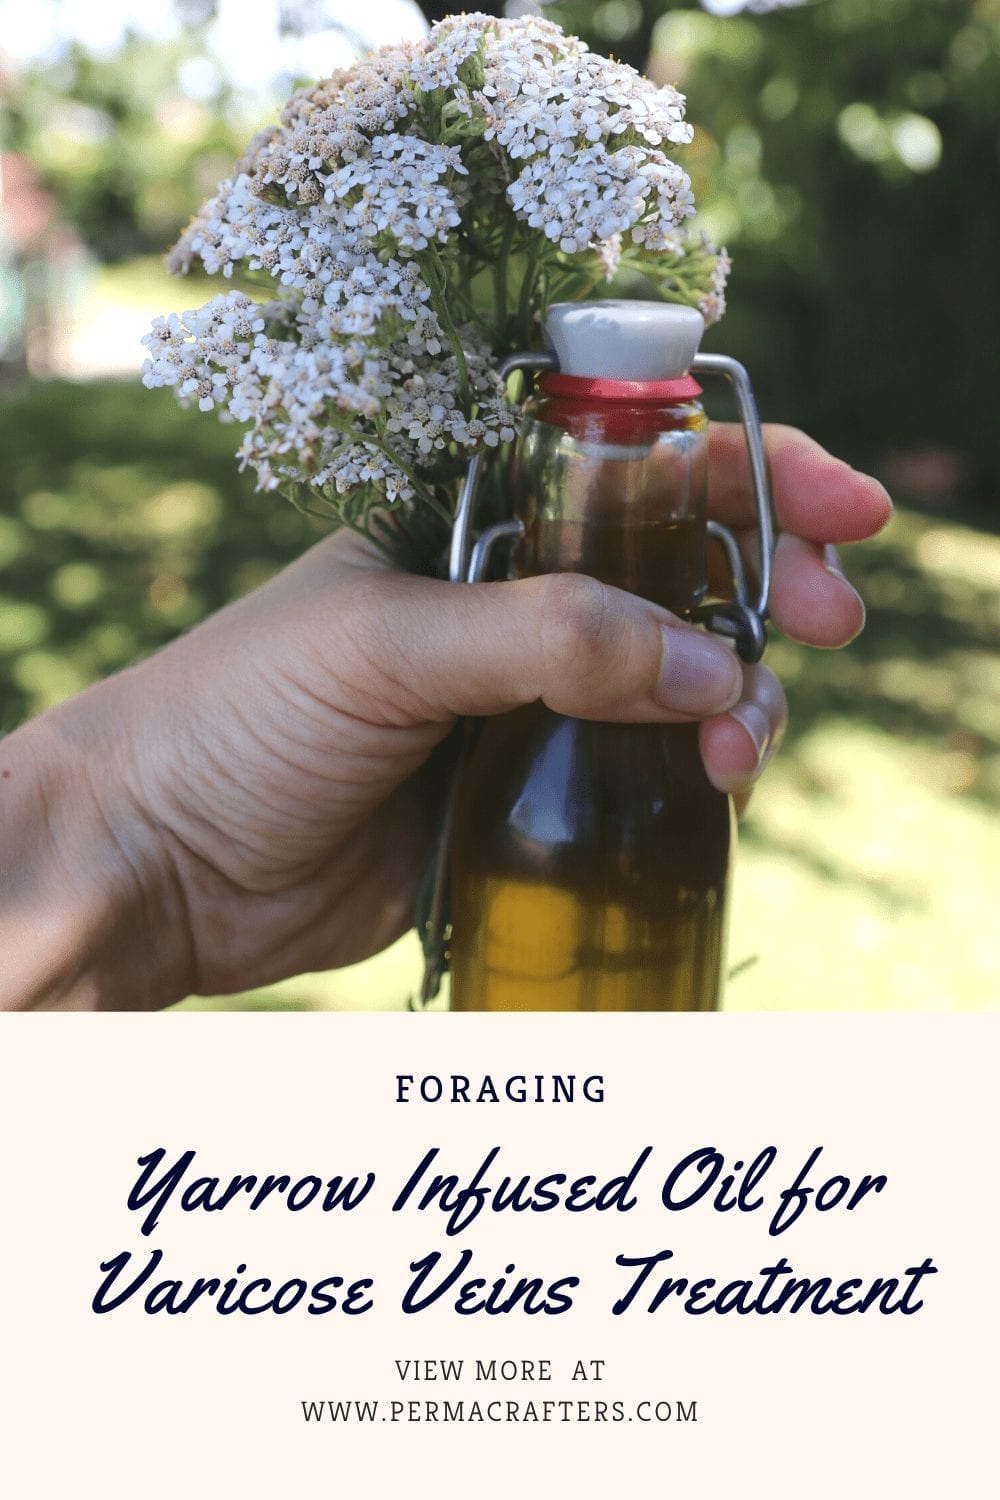 Yarrow Infused Oil for Varicose Veins Treatment BP1